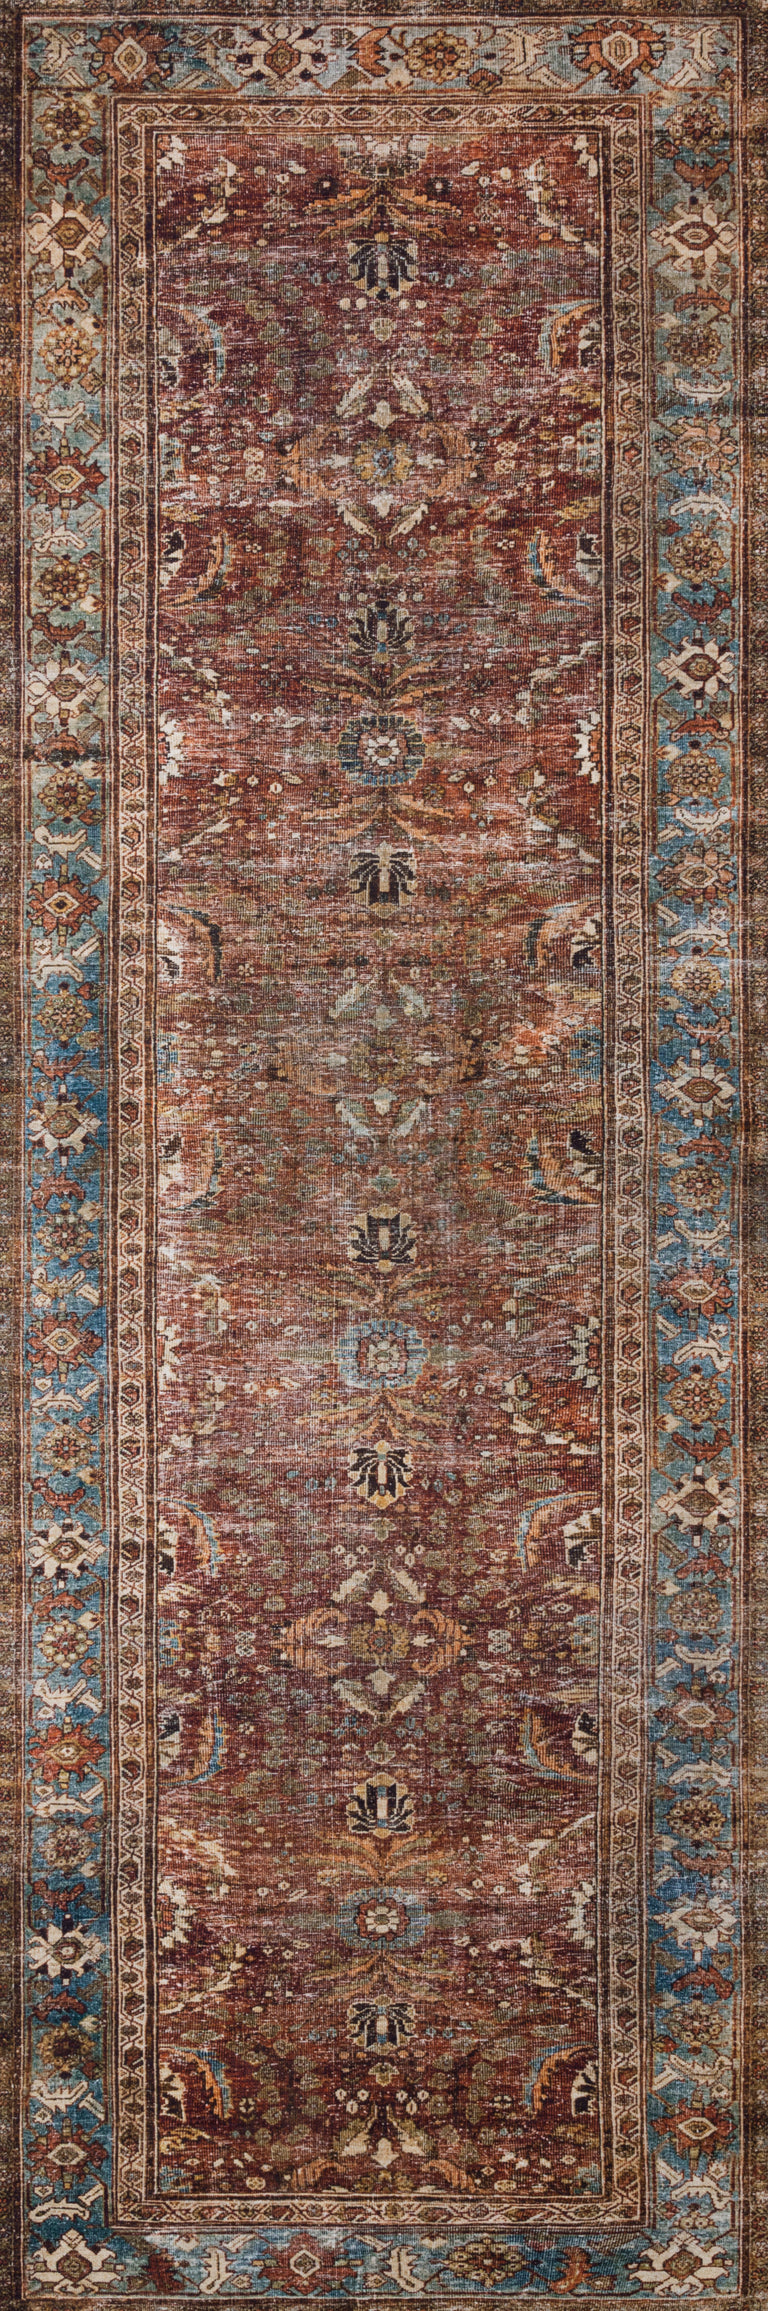 Loloi II Layla Collection Rug in Brick, Blue - 2'6" x 9'6"